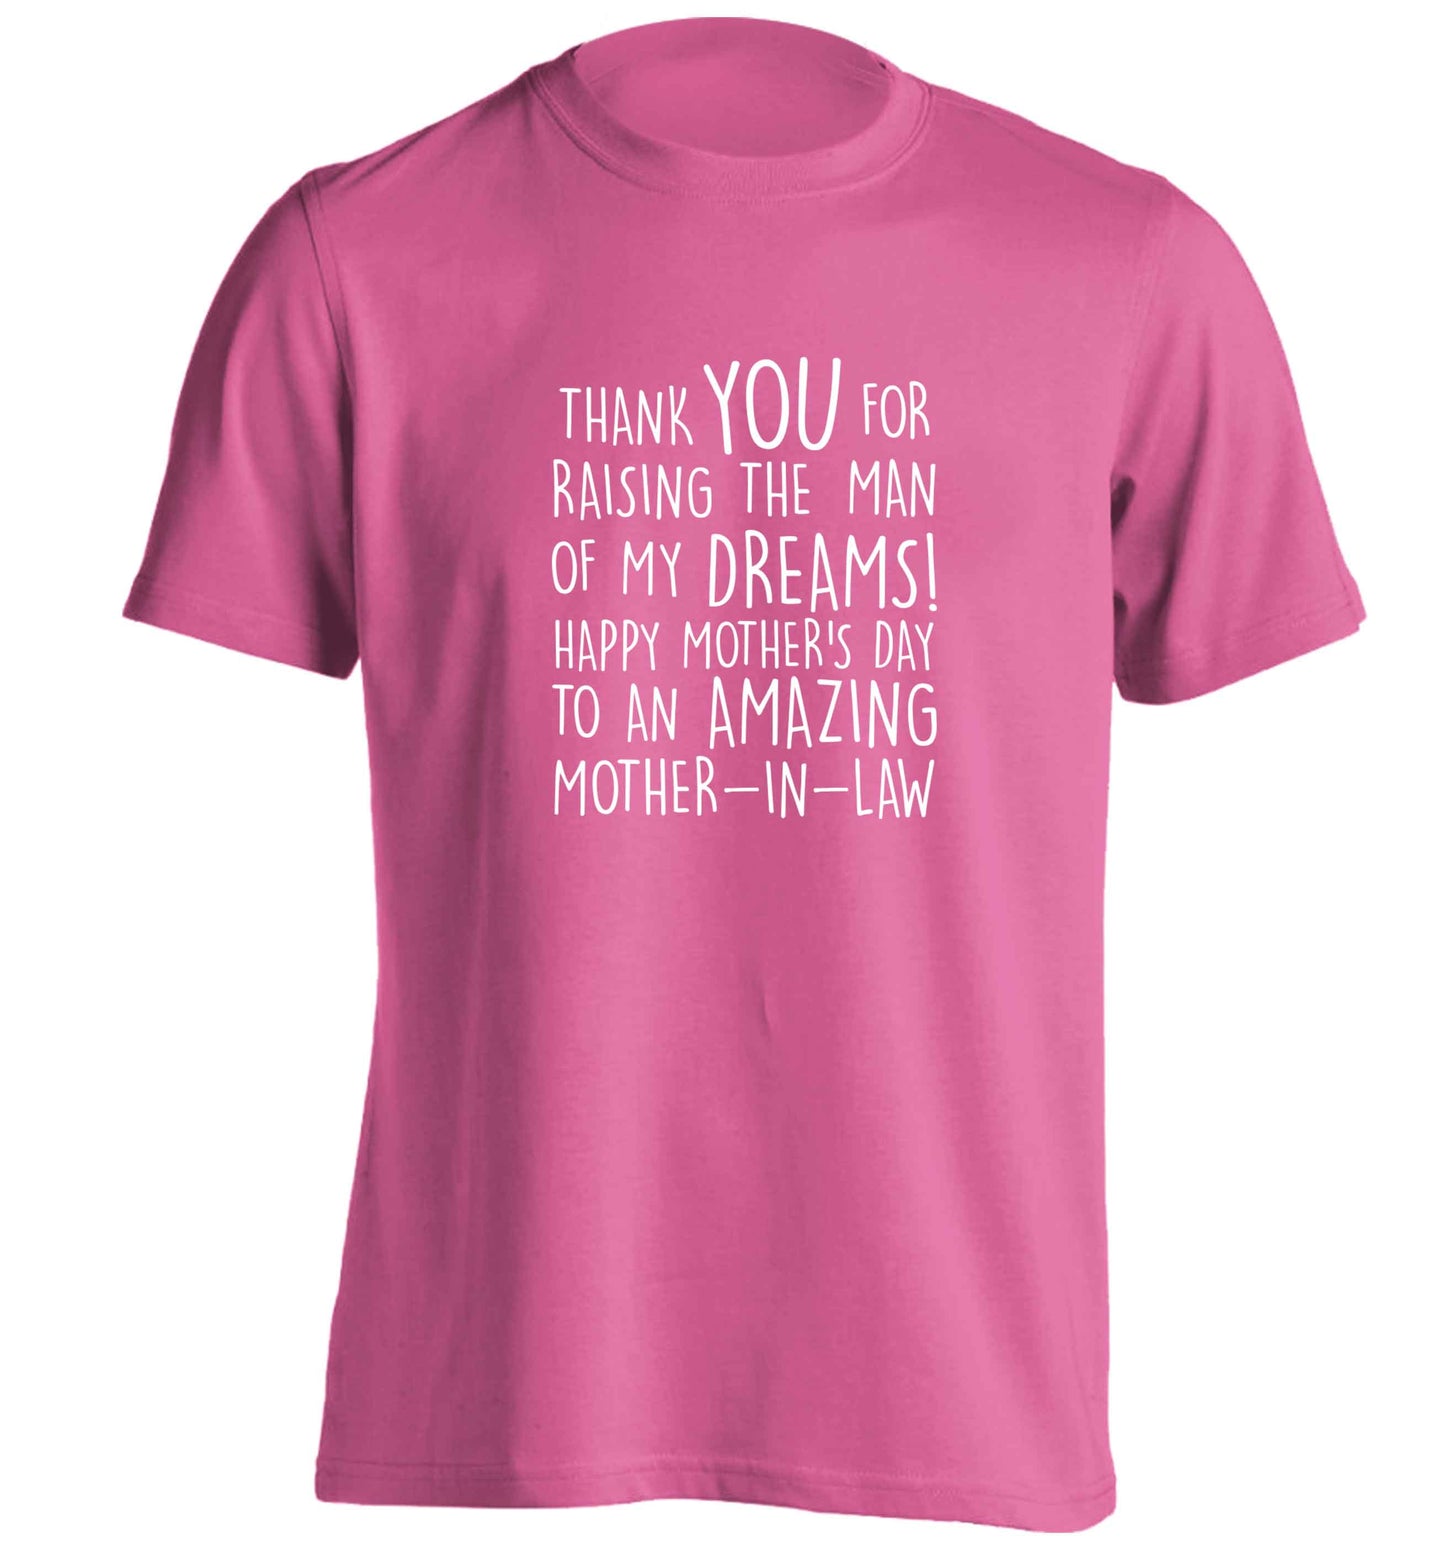 Raising the man of my dreams mother's day mother-in-law adults unisex pink Tshirt 2XL